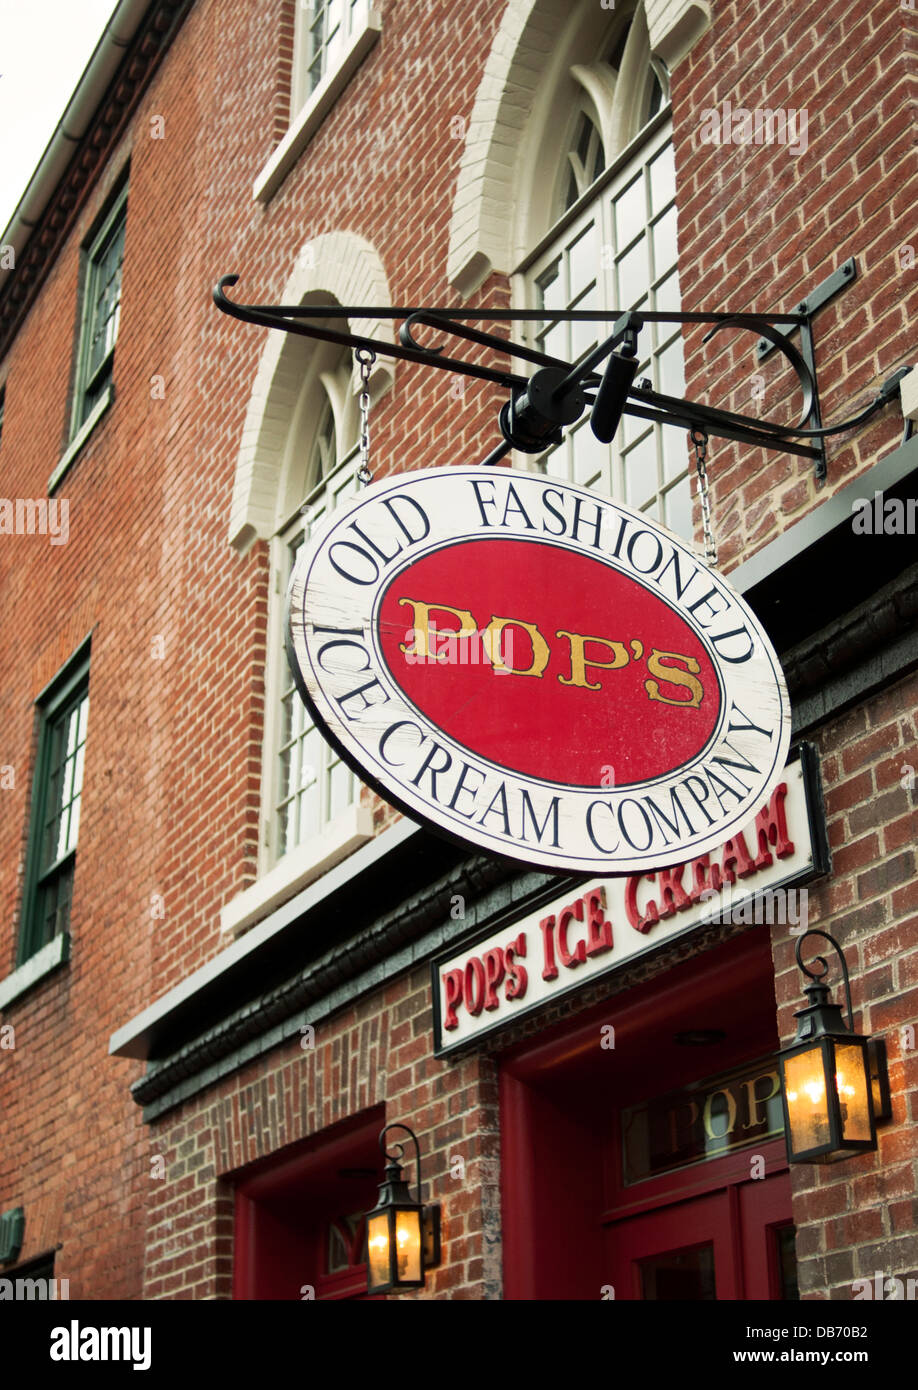 Pops Old Fashioned Ice Cream Company a popular ice cream shop / restaurant in Old Town Alexandria, Virginia Stock Photo